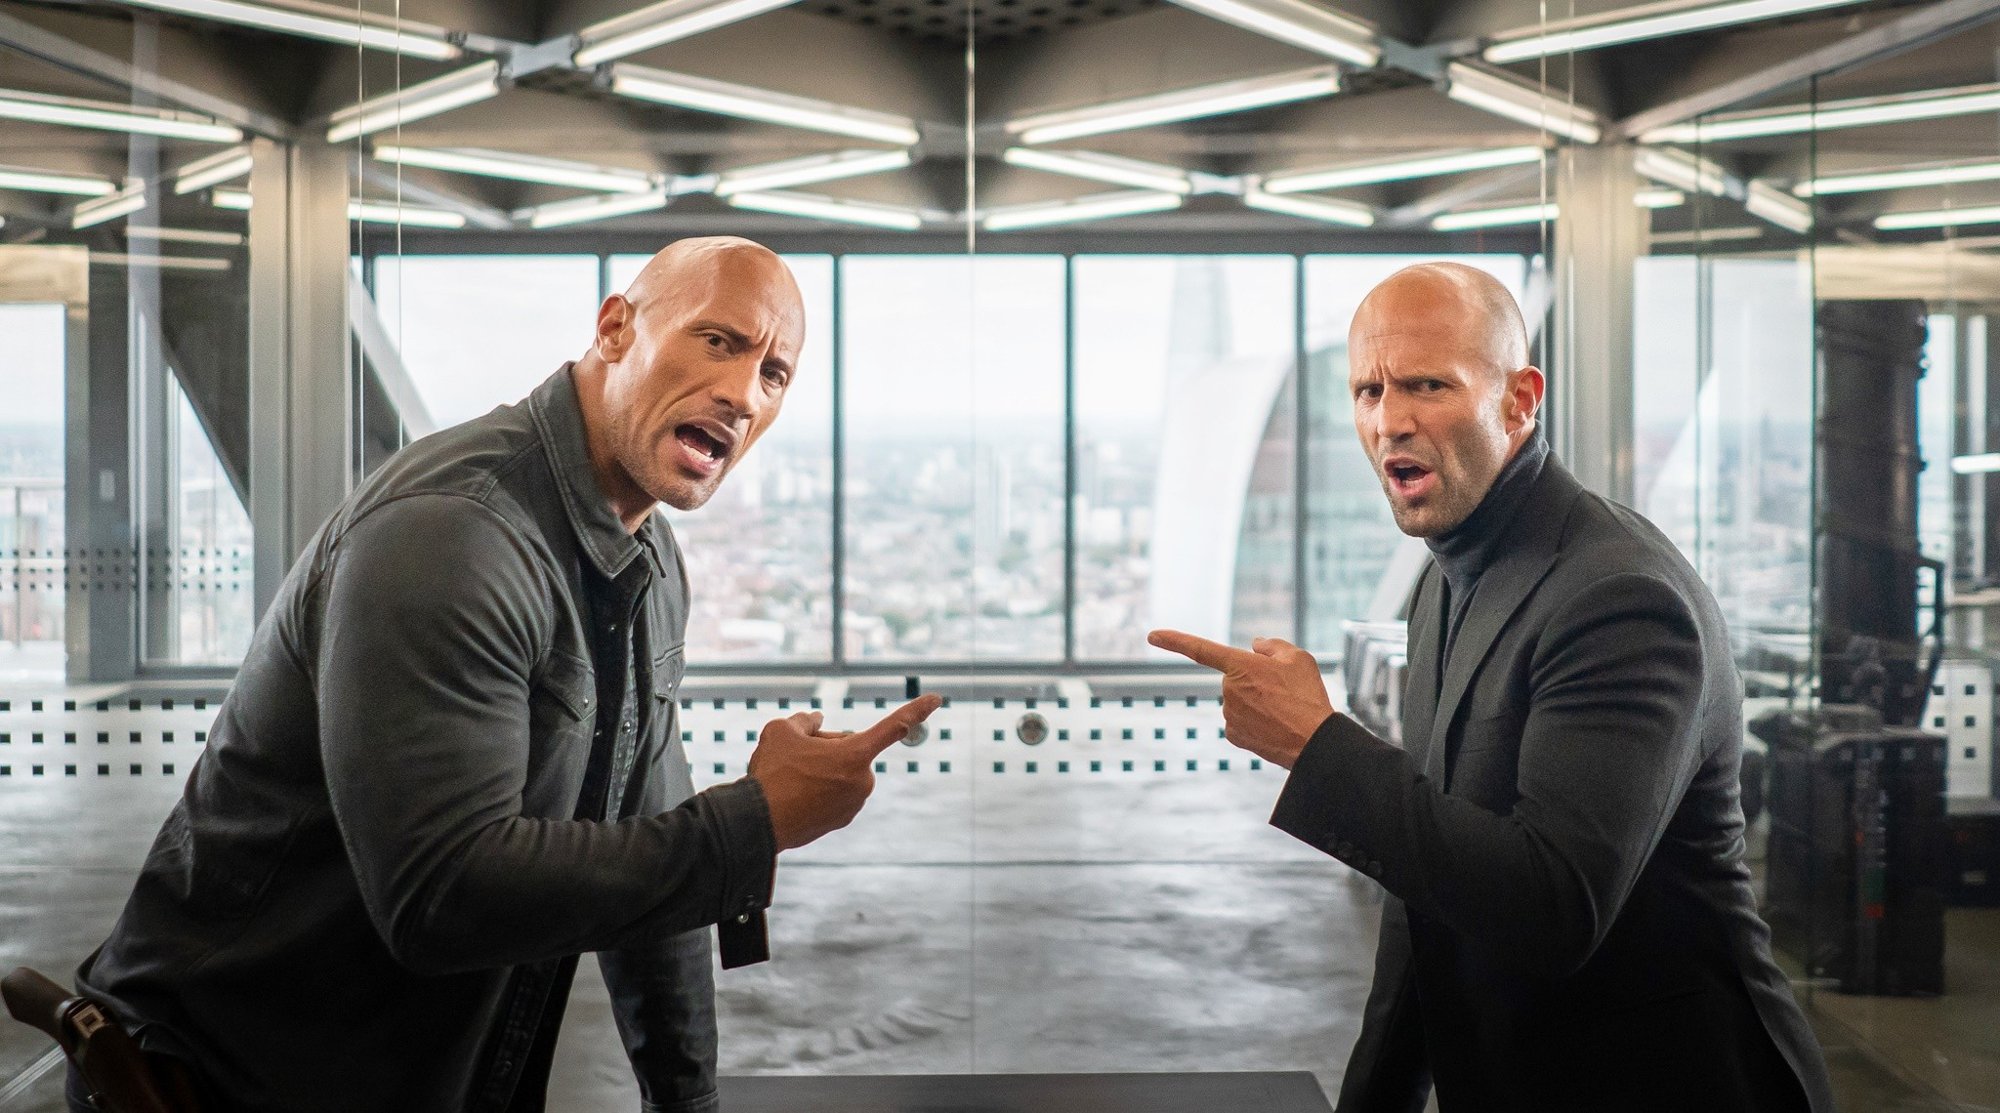 The Rock stars as Luke Hobbs and Jason Statham stars as Deckard Shaw in Universal Pictures' Fast & Furious Presents: Hobbs & Shaw (2019)